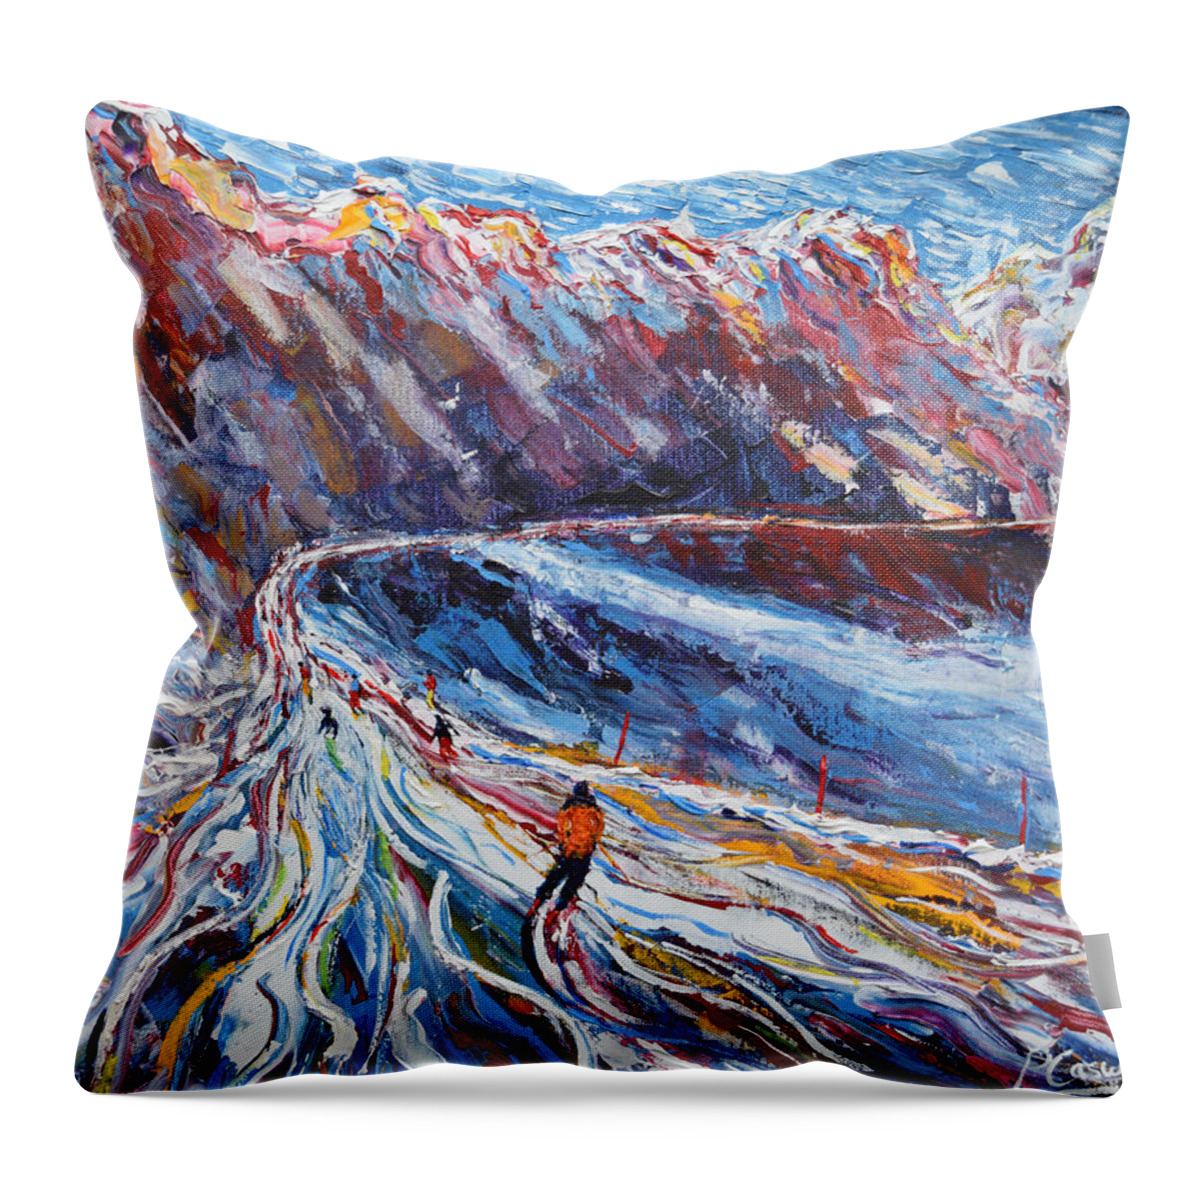 Les Arcs Throw Pillow featuring the painting Grand Renard by Pete Caswell